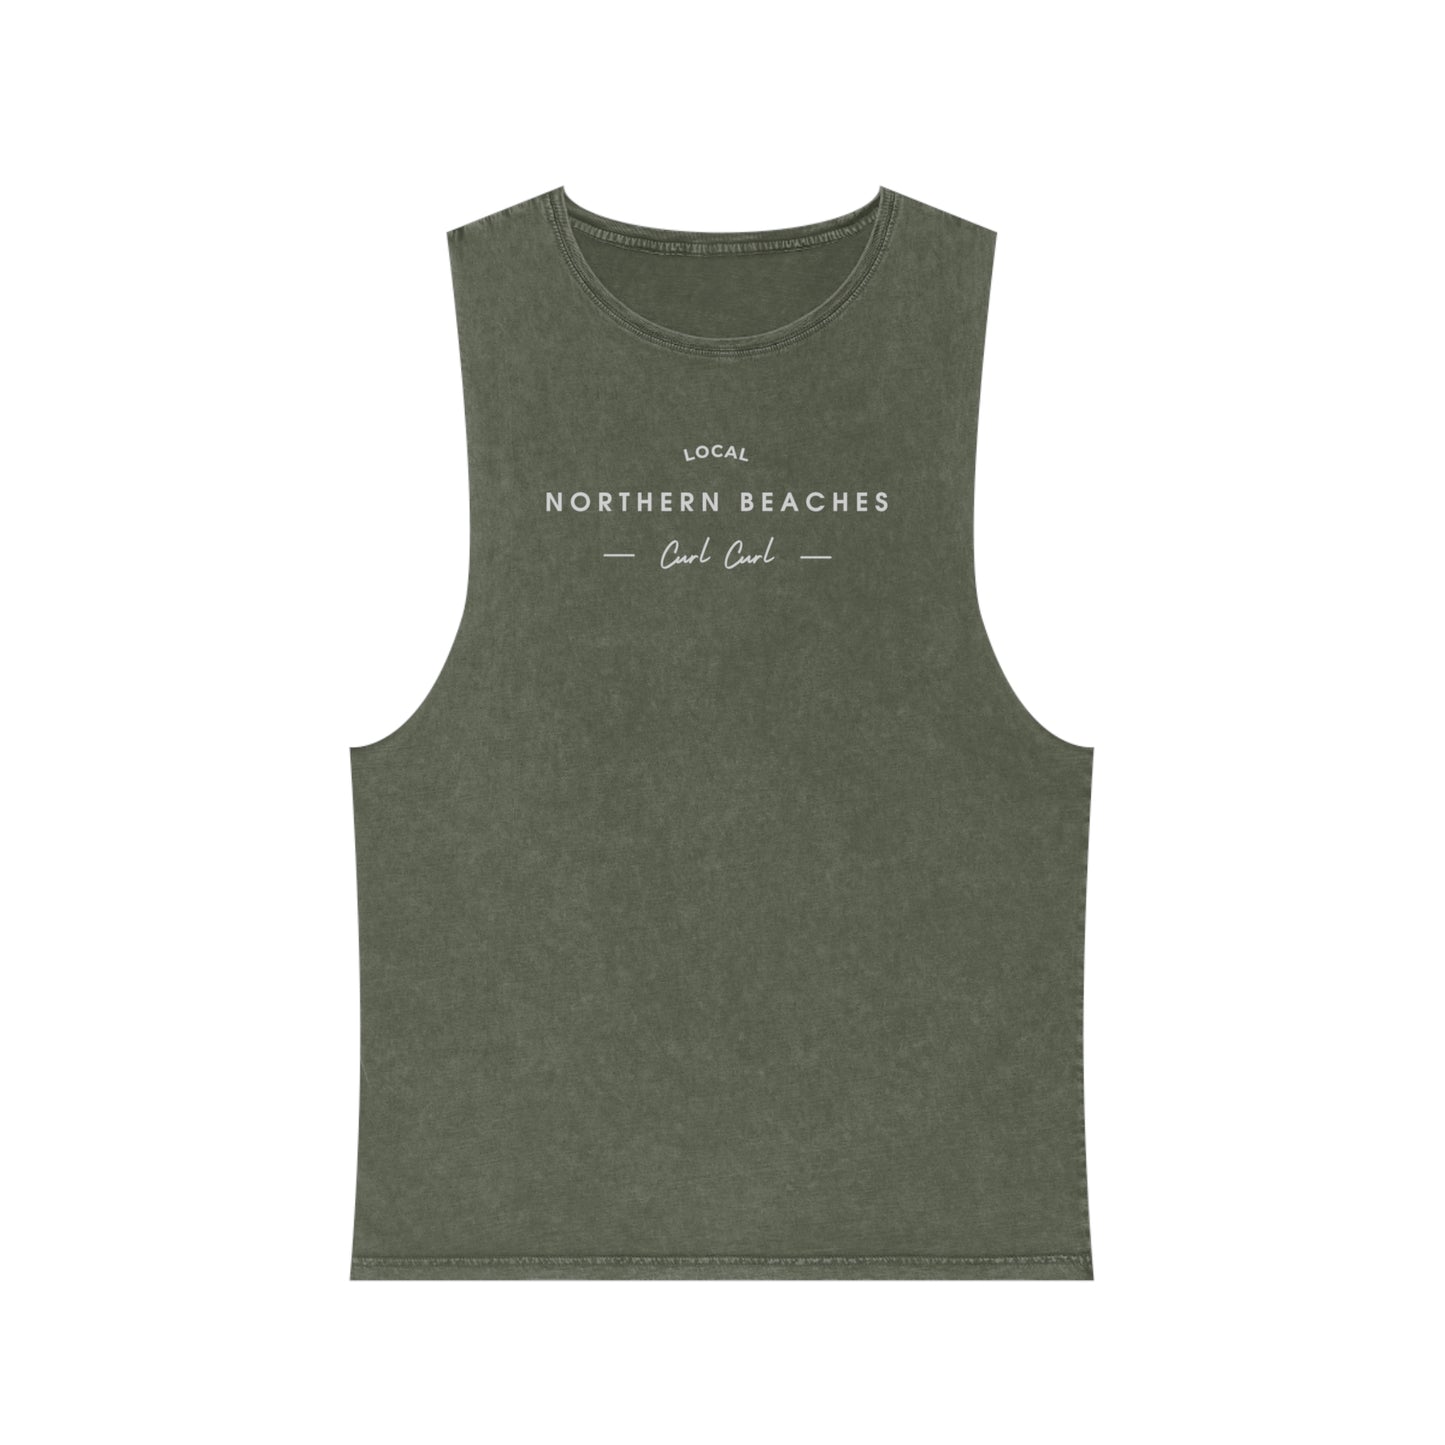 Stonewash Tank Top with Northern Beaches Curl Curl logo